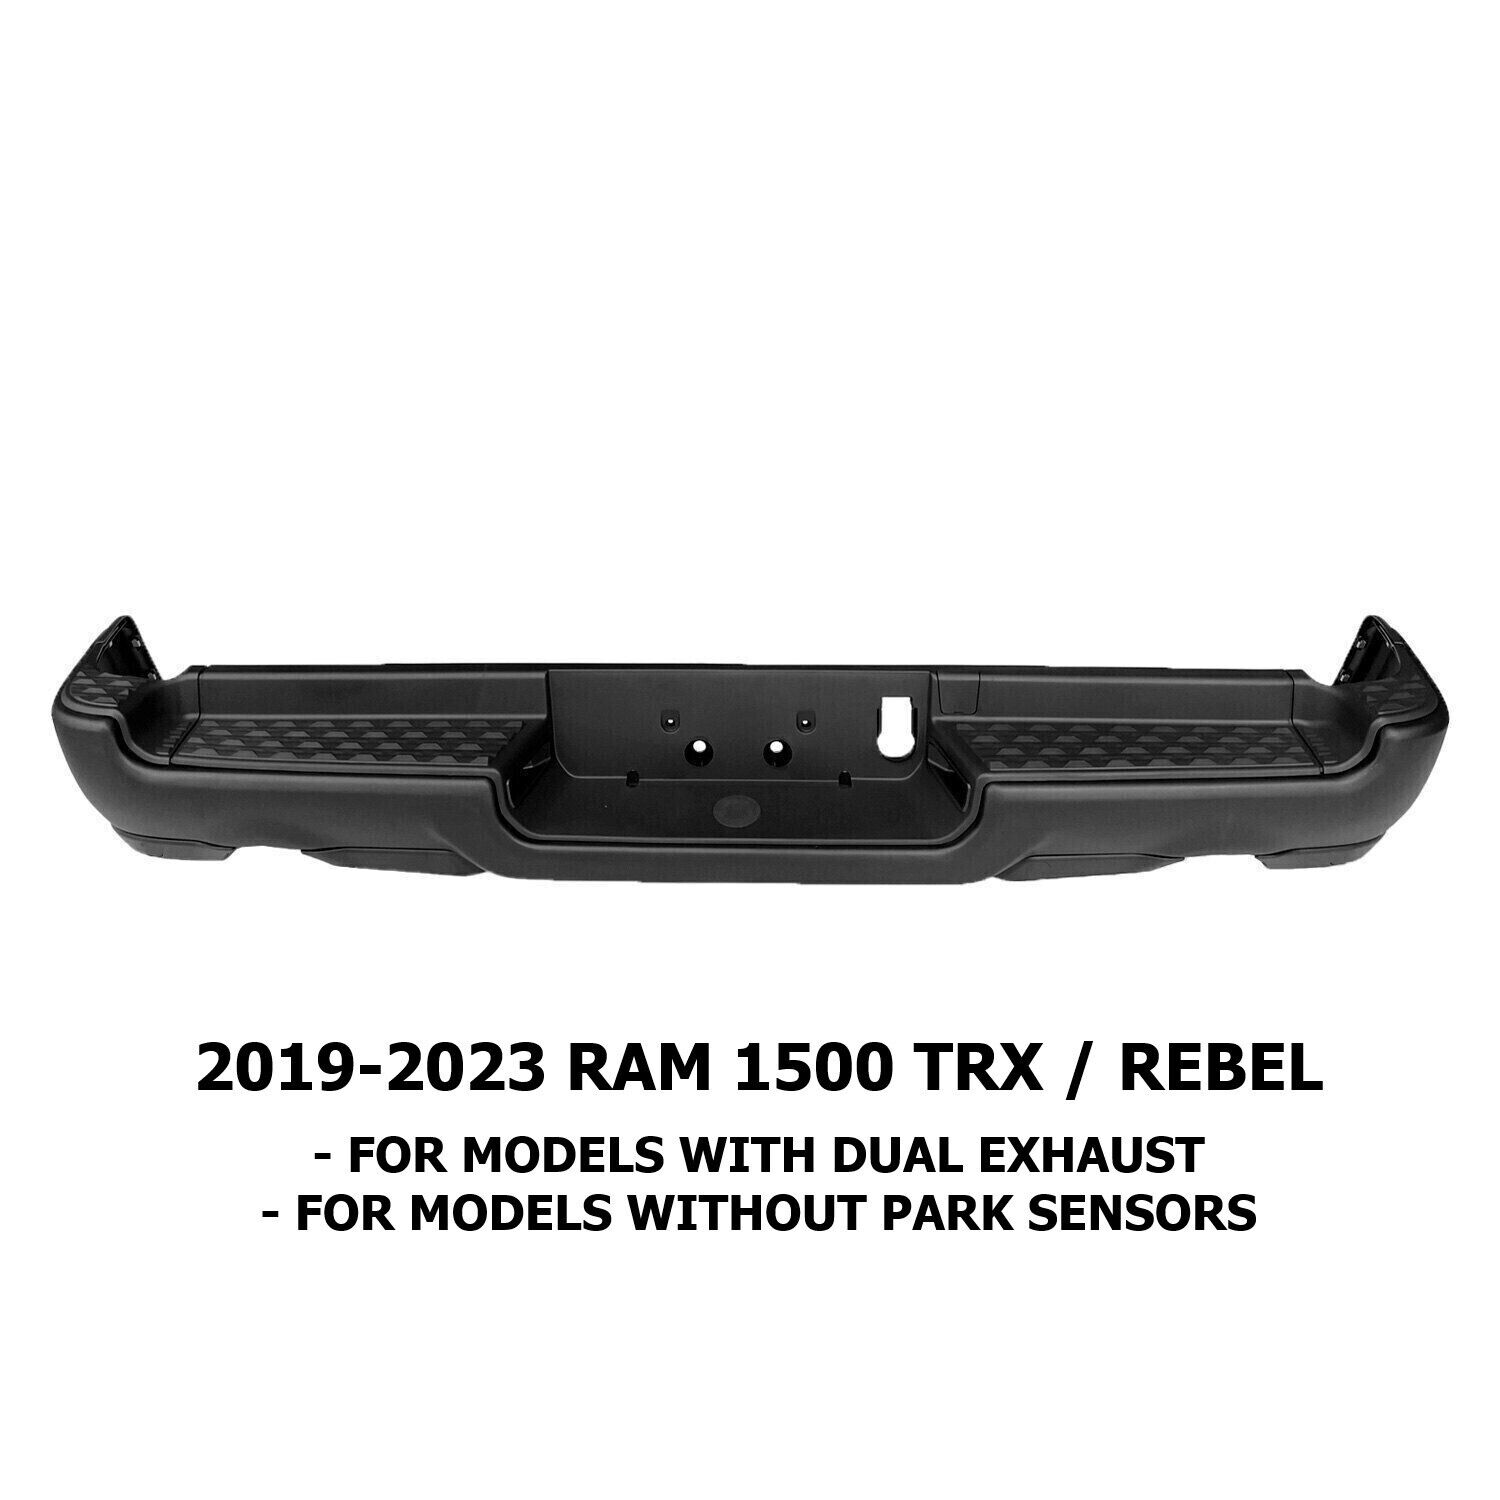 NEW Complete Rear Bumper Assembly For 2019-2024 Dual Exhaust RAM 1500 Rebel